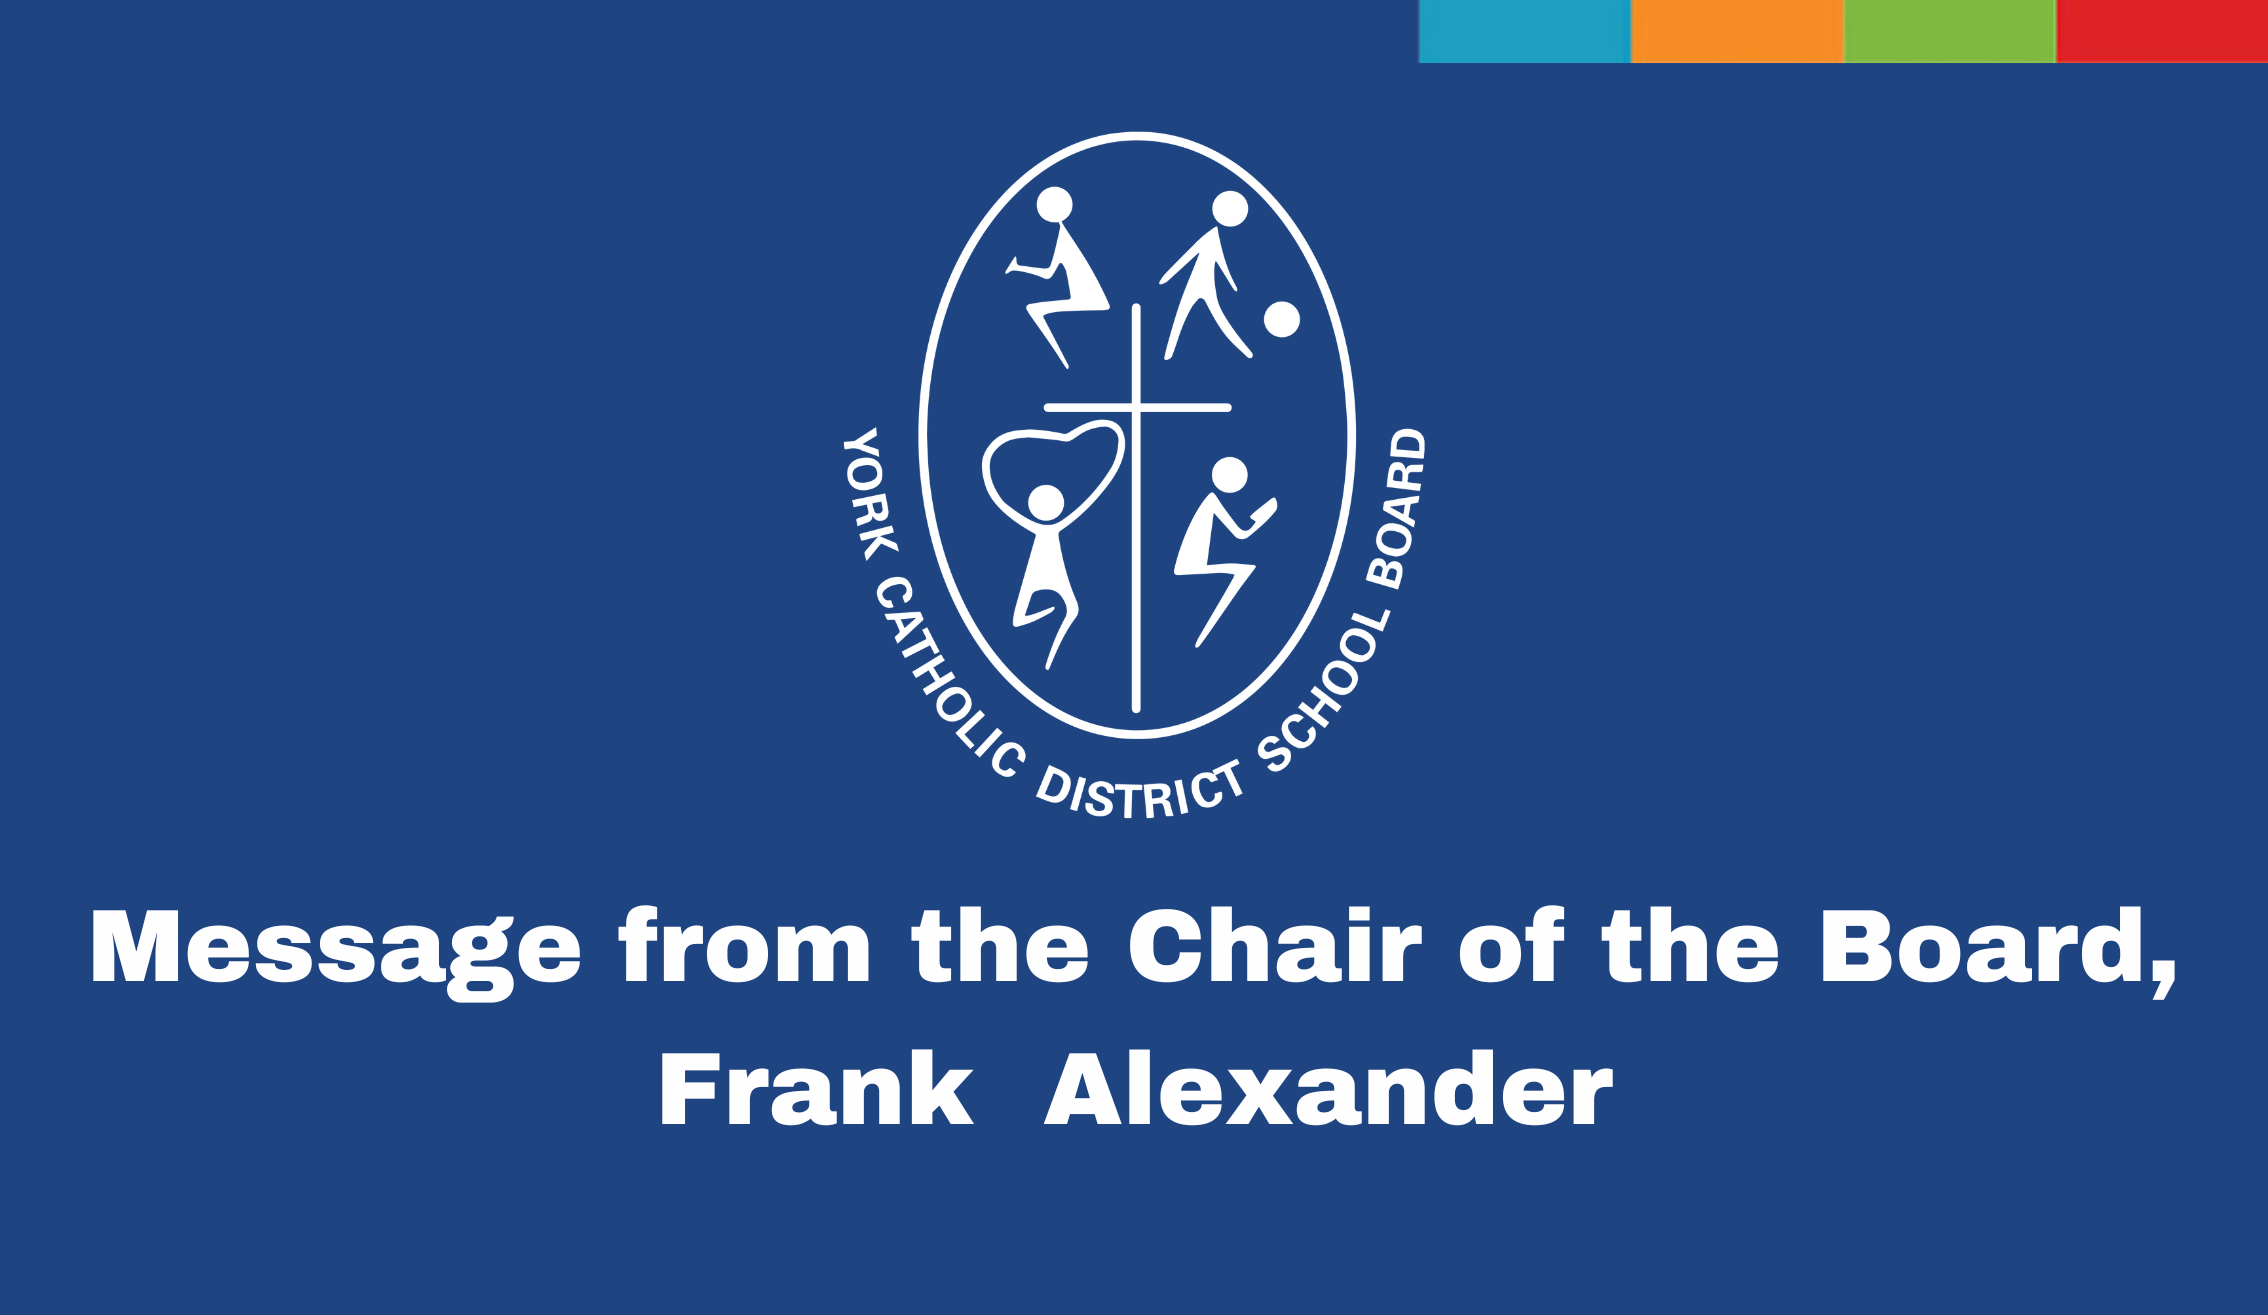 Blue background, white  logo, message from the chair of the Board Frank Alexander